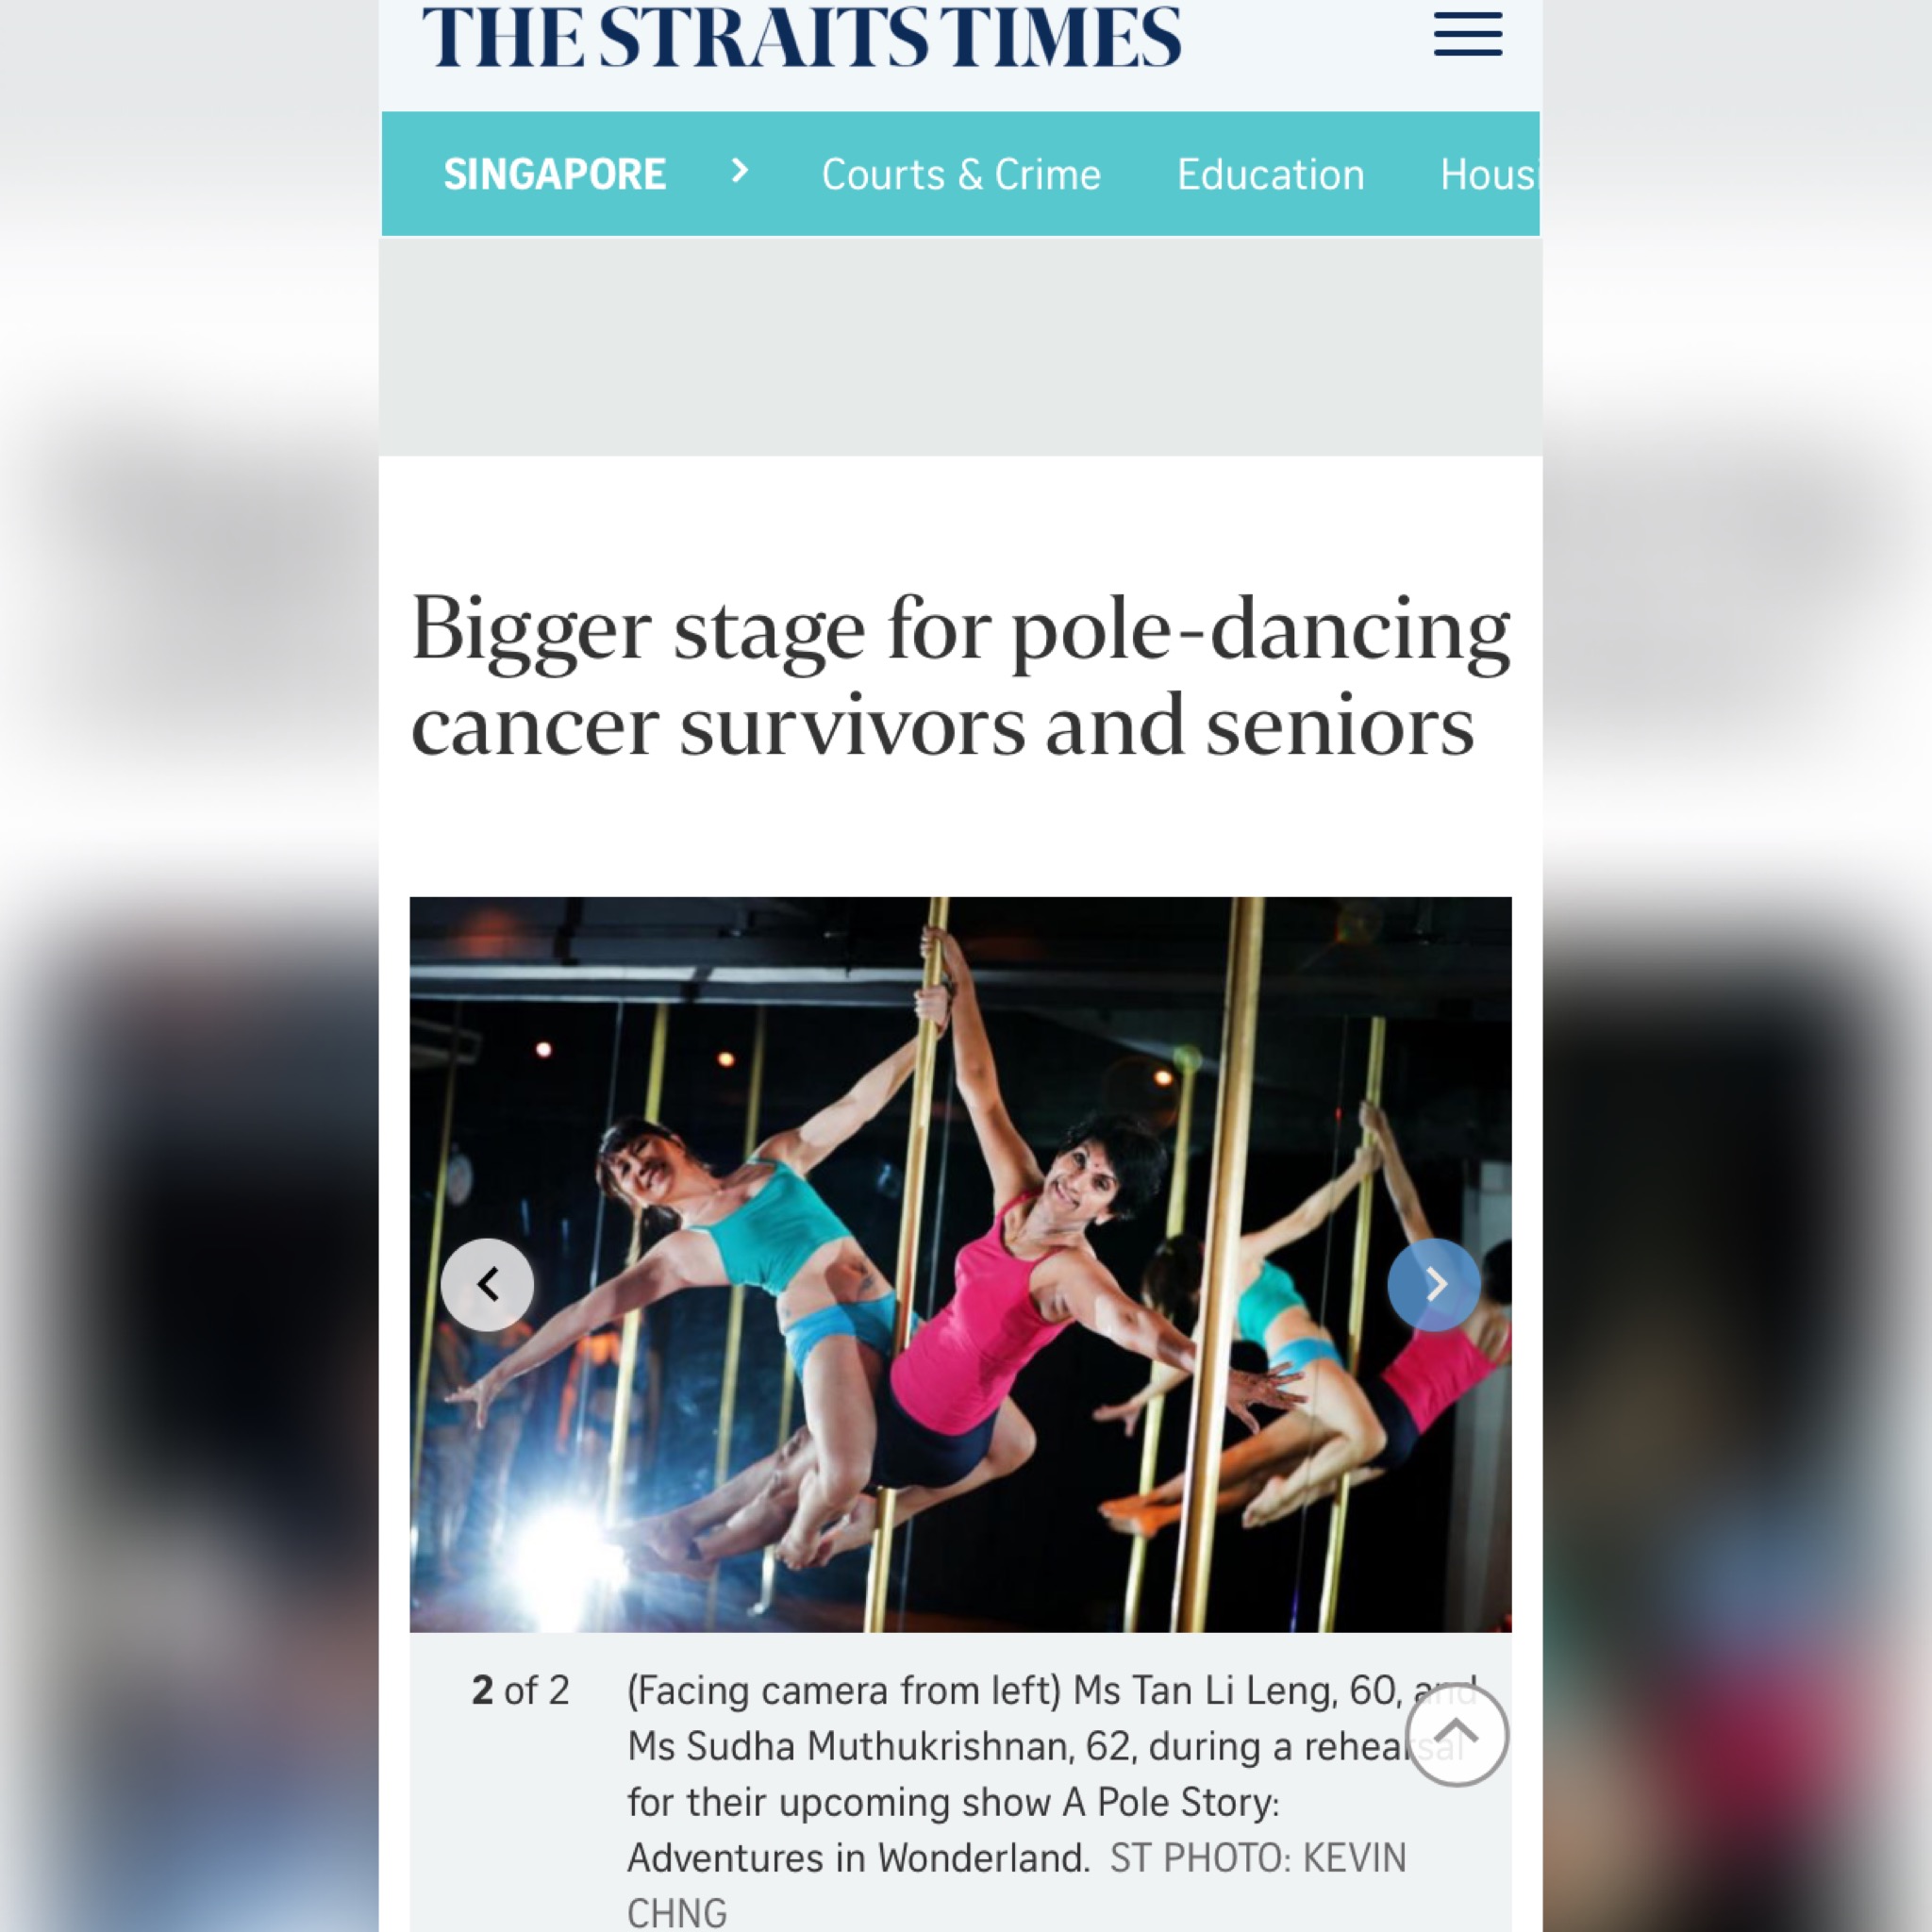 PR - A Pole Story 2018 - Straits Times - Pole-dancing breast cancer survivors to perform on Saturday - screen grab 01.jpg